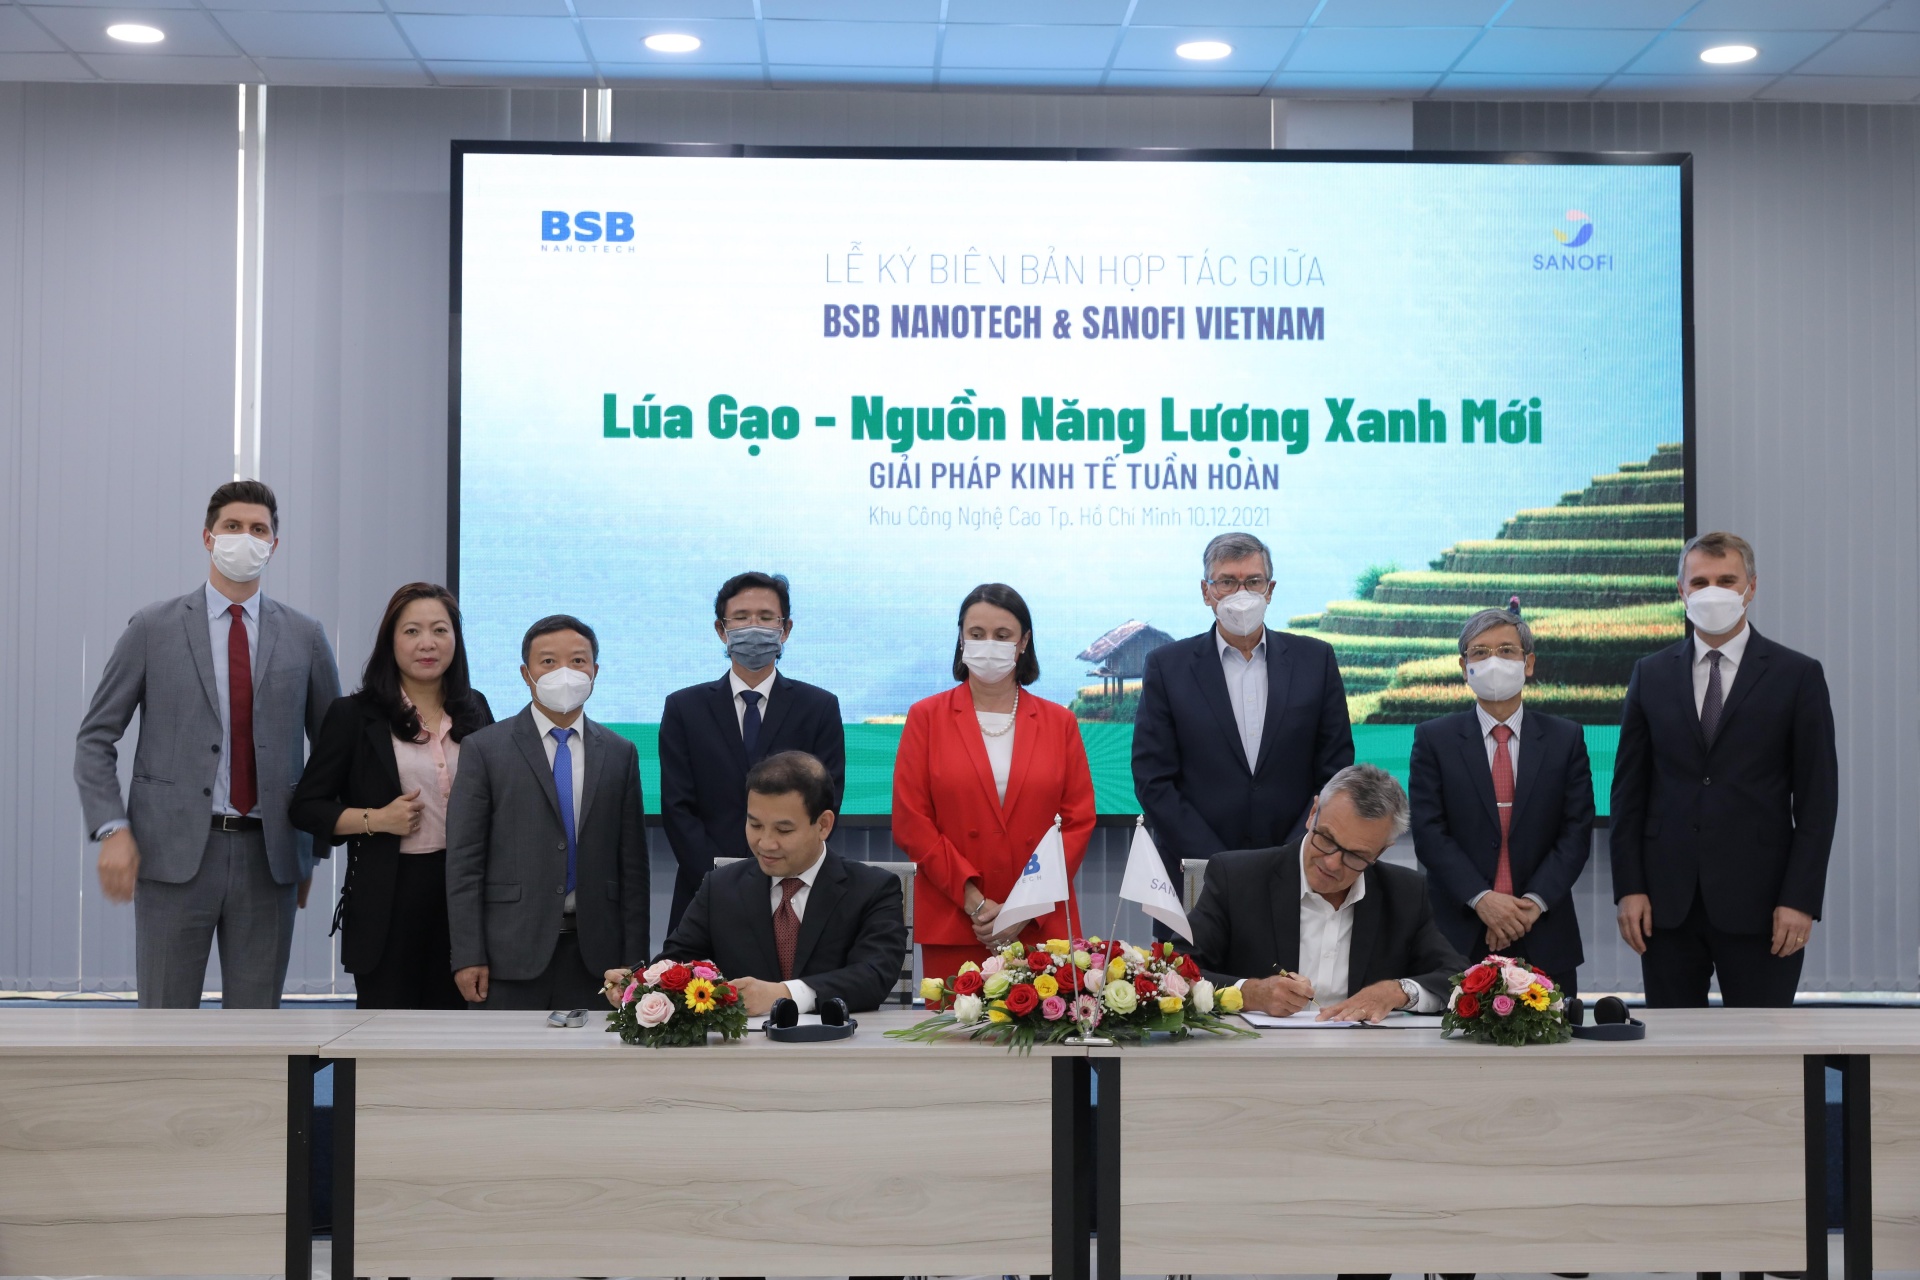 Sanofi Vietnam signs MoU with BSB Nanotech to create circular economy for rice husks